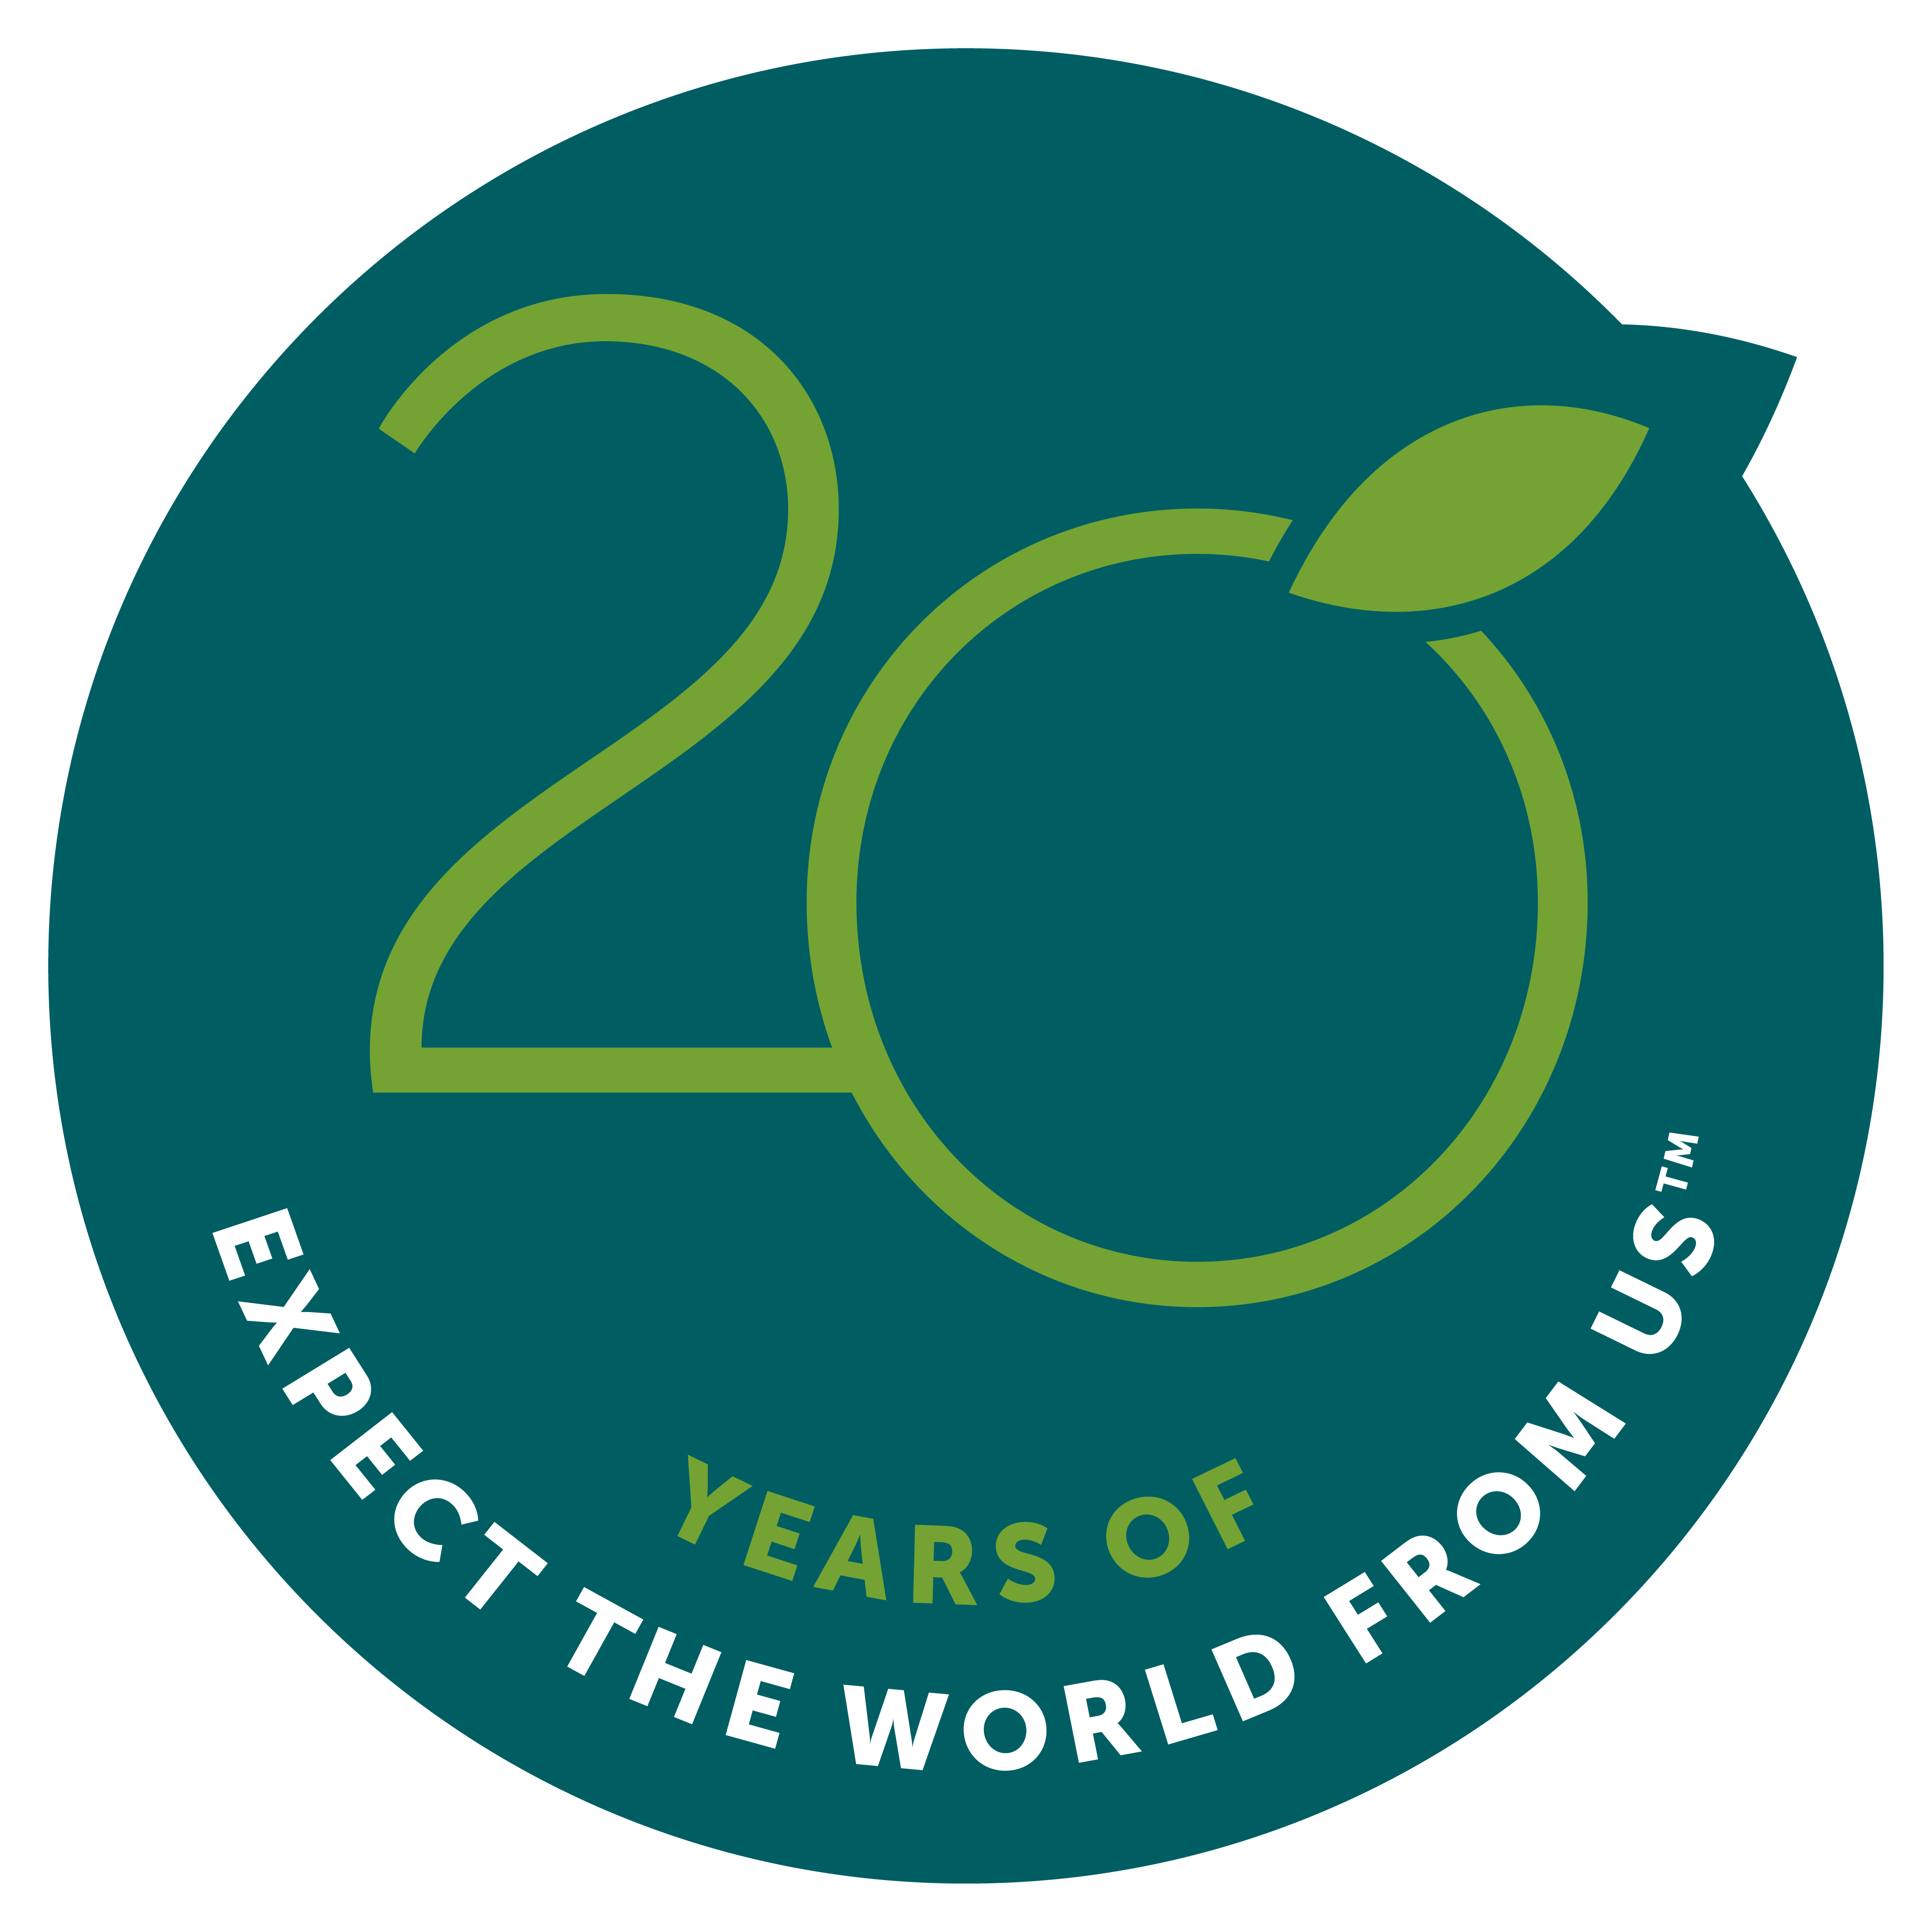 20 years of expect the world from us